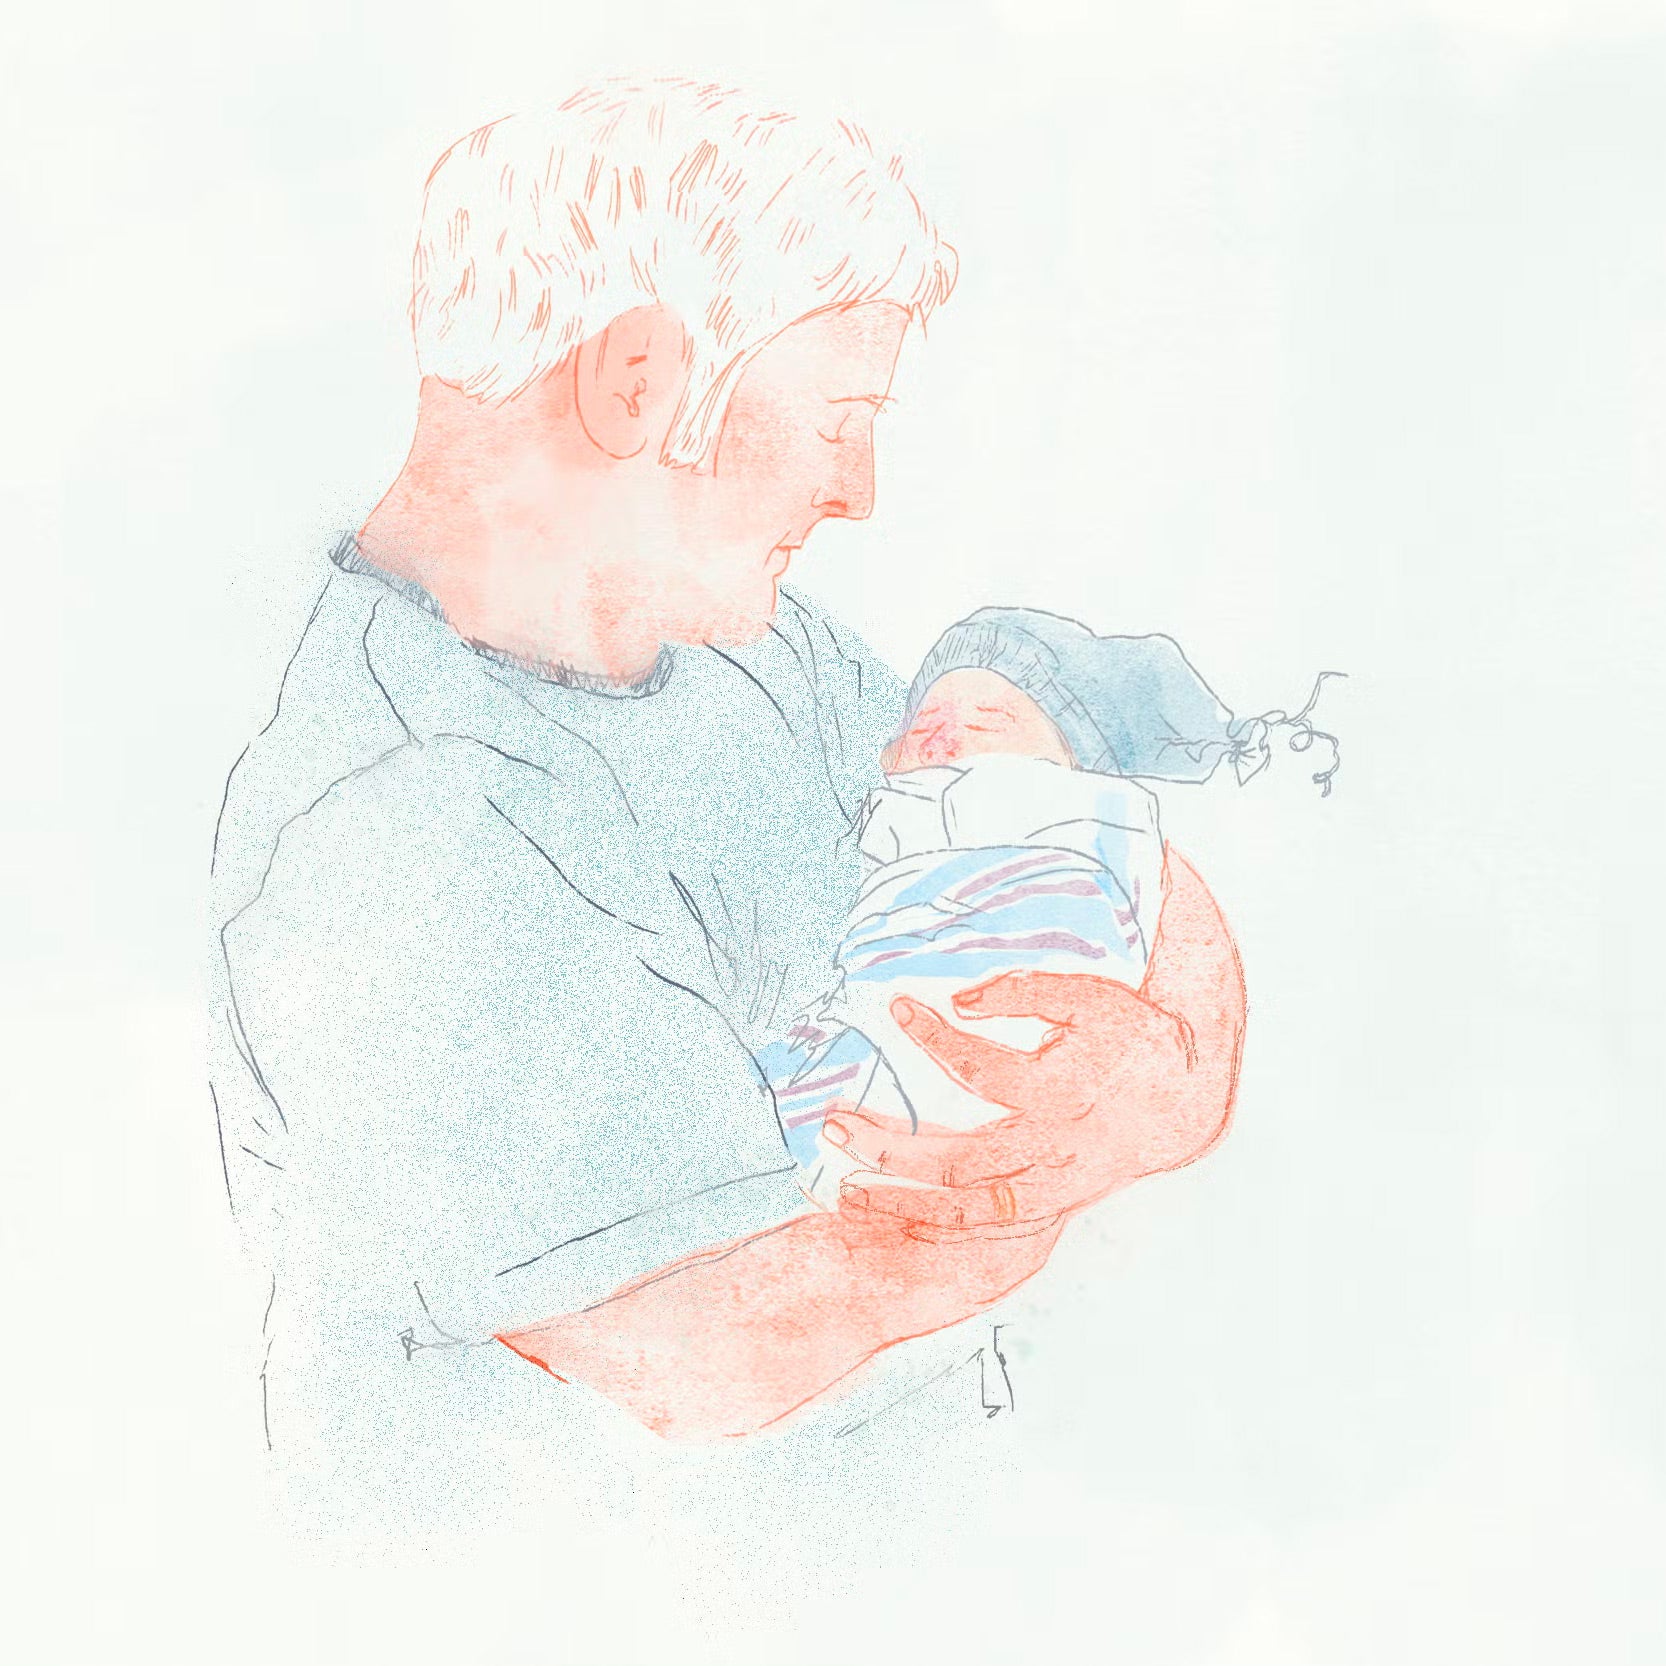 A colored pencil illustration of a man in a blue T-shirt tenderly holding a swaddled baby wearing a blue hat.